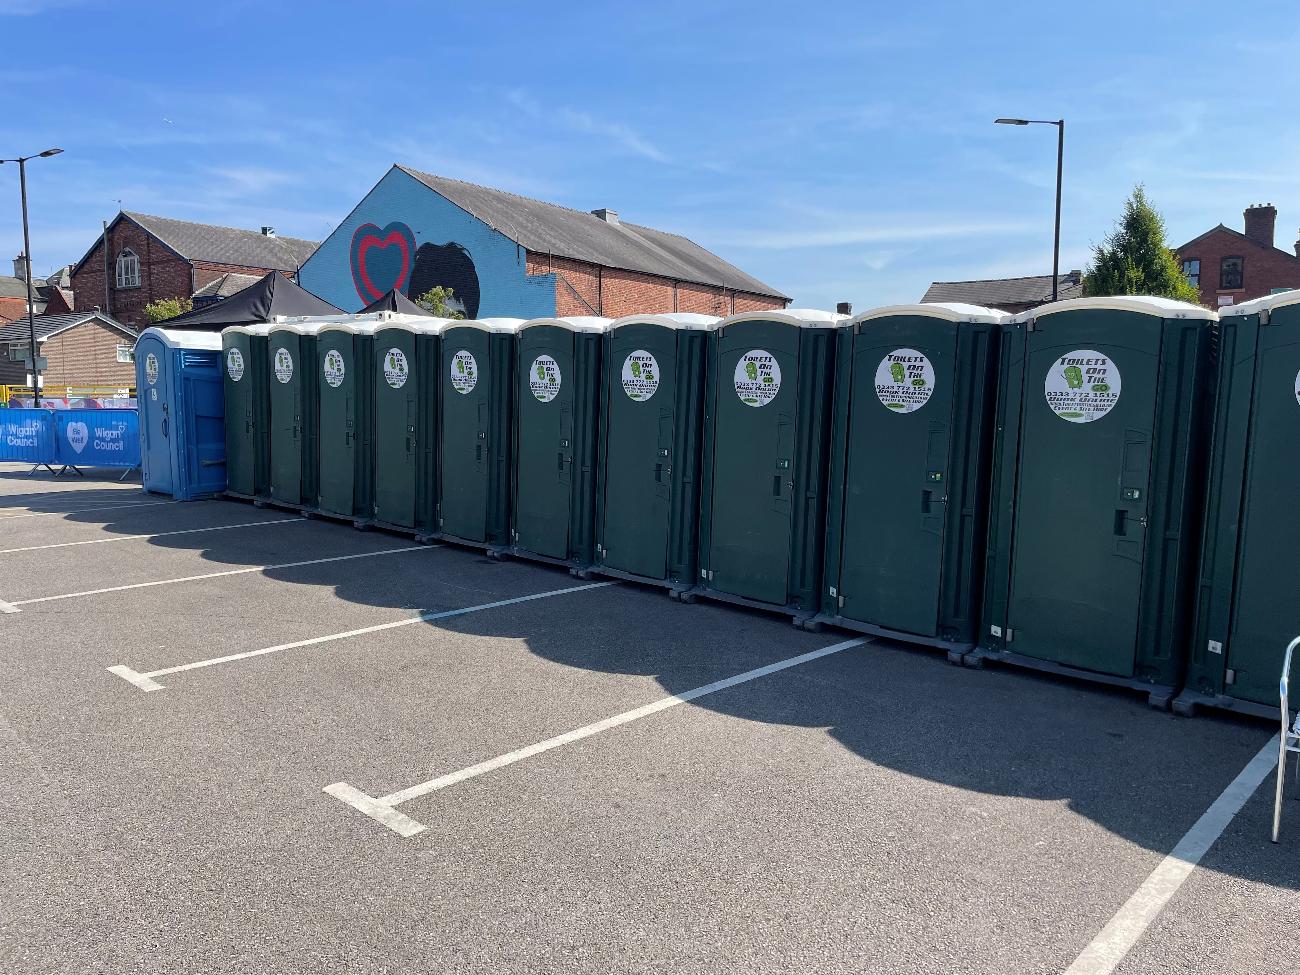 Gallery | Portable Toilet Loo Hire Rental Company in North West uk and Manchester gallery image 41